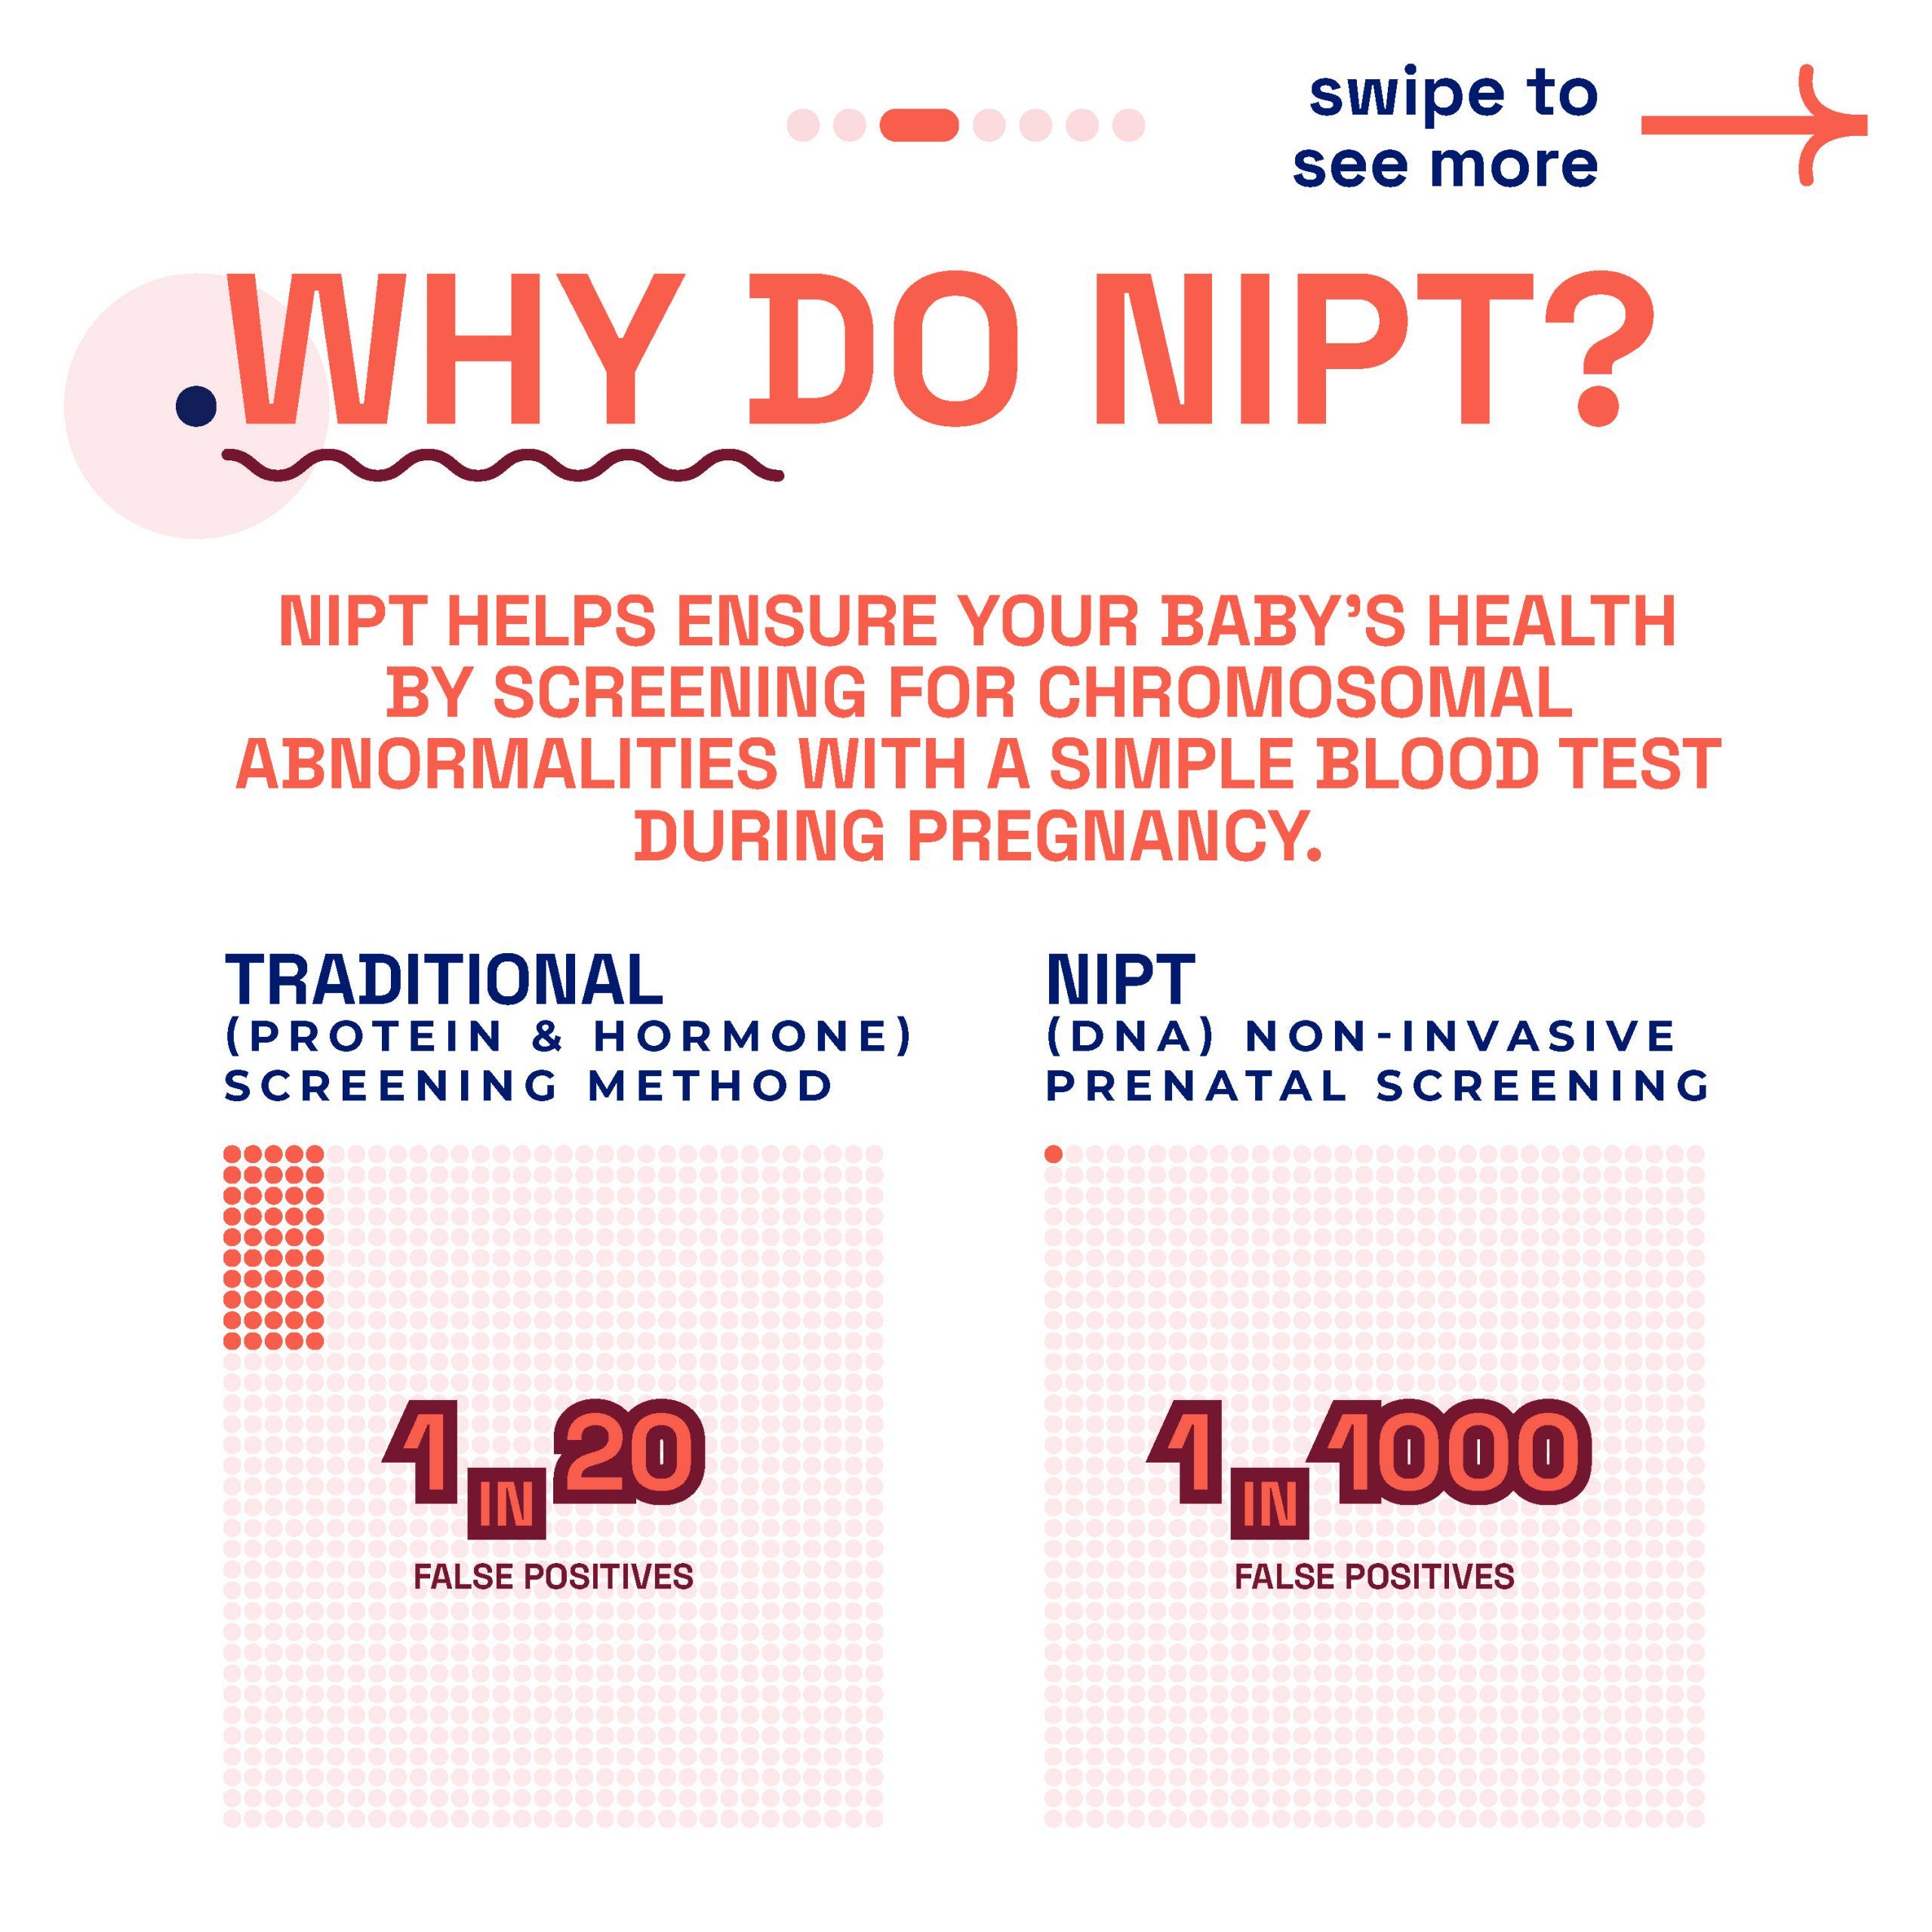 Informational image by London Pregnancy Clinic showing the advantages of NIPT over traditional screening methods with statistics on false positives.